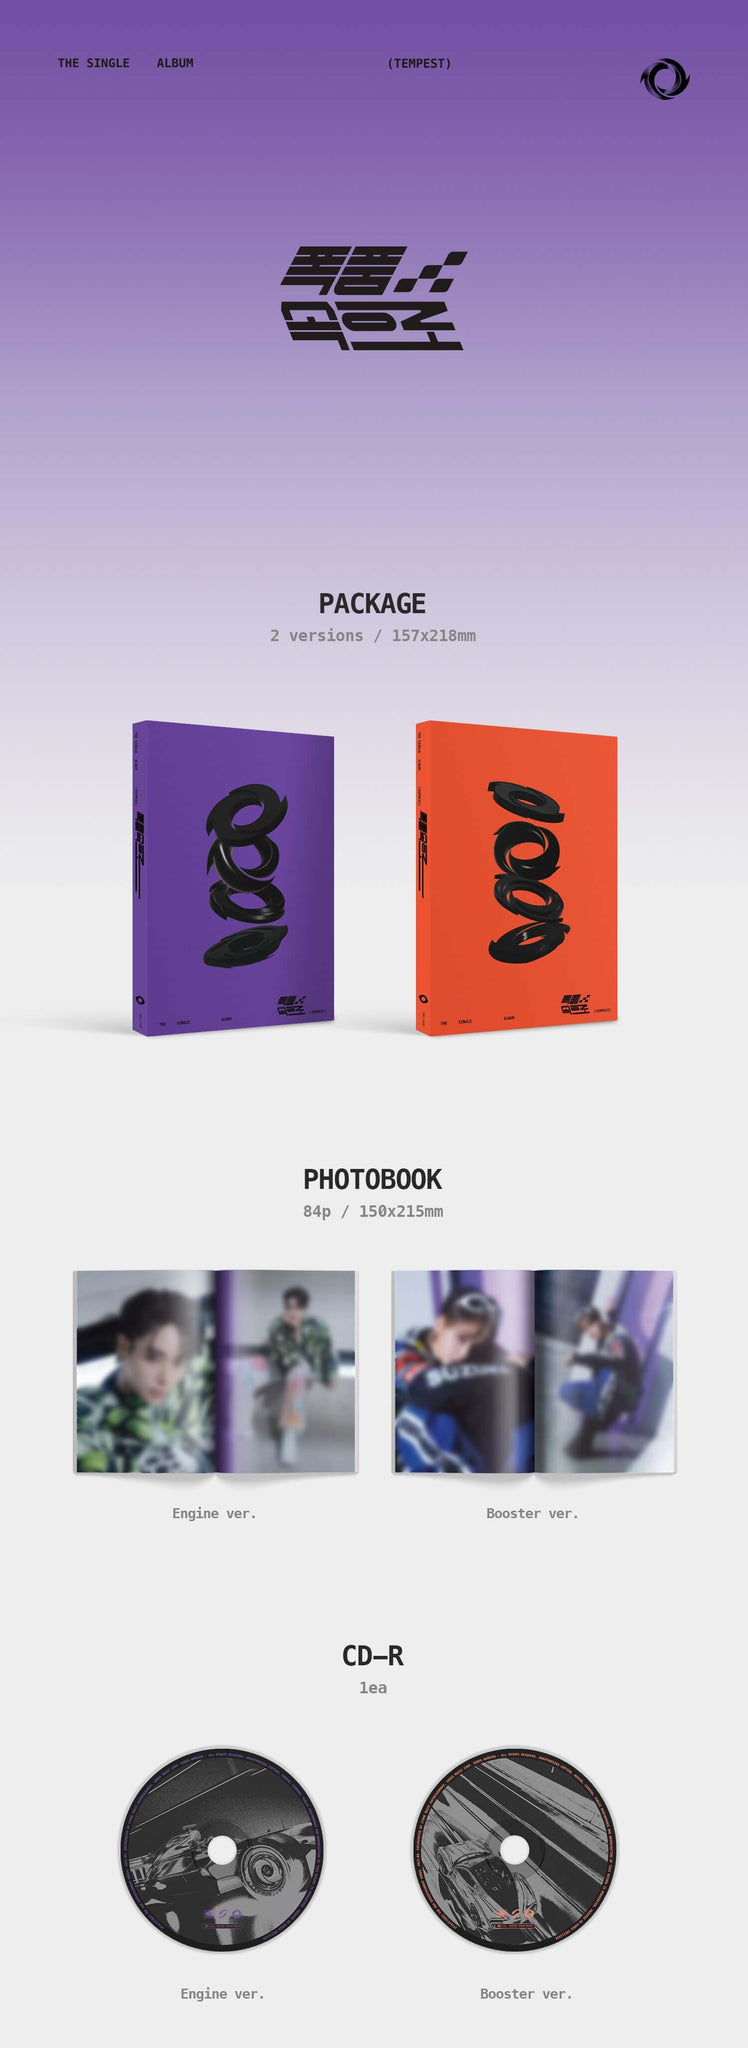 TEMPEST 1st Single Album 폭풍 속으로 Inclusions Package Photobook CD